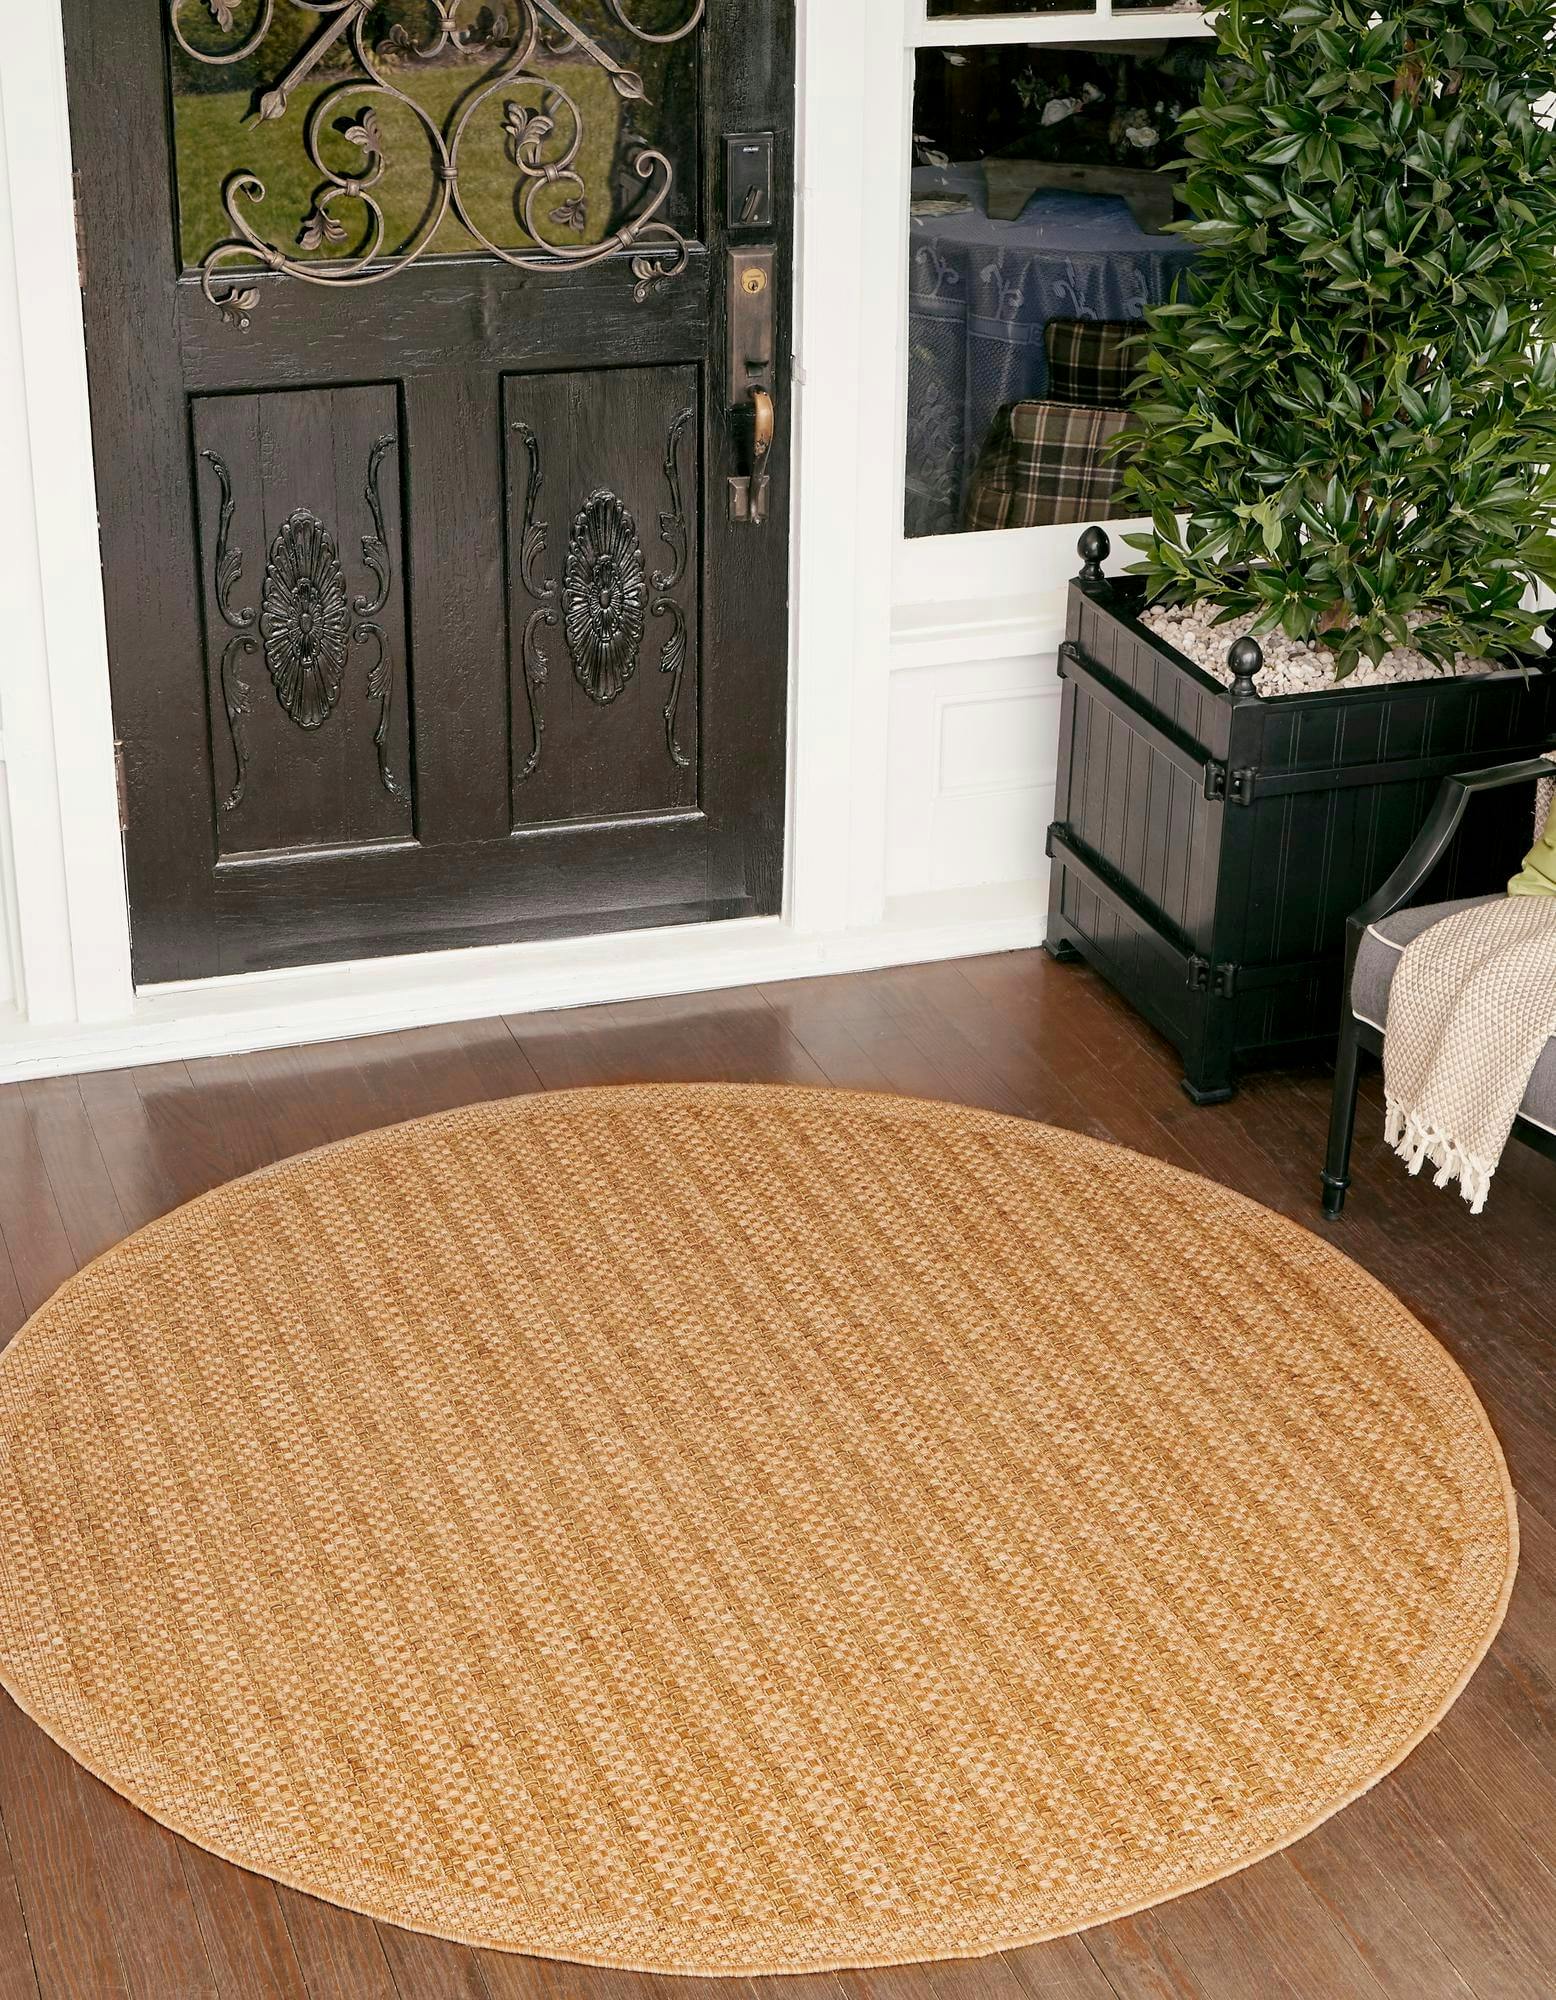 Easy-Care Reversible Stripe Round Outdoor Rug, 6'1", Light Brown